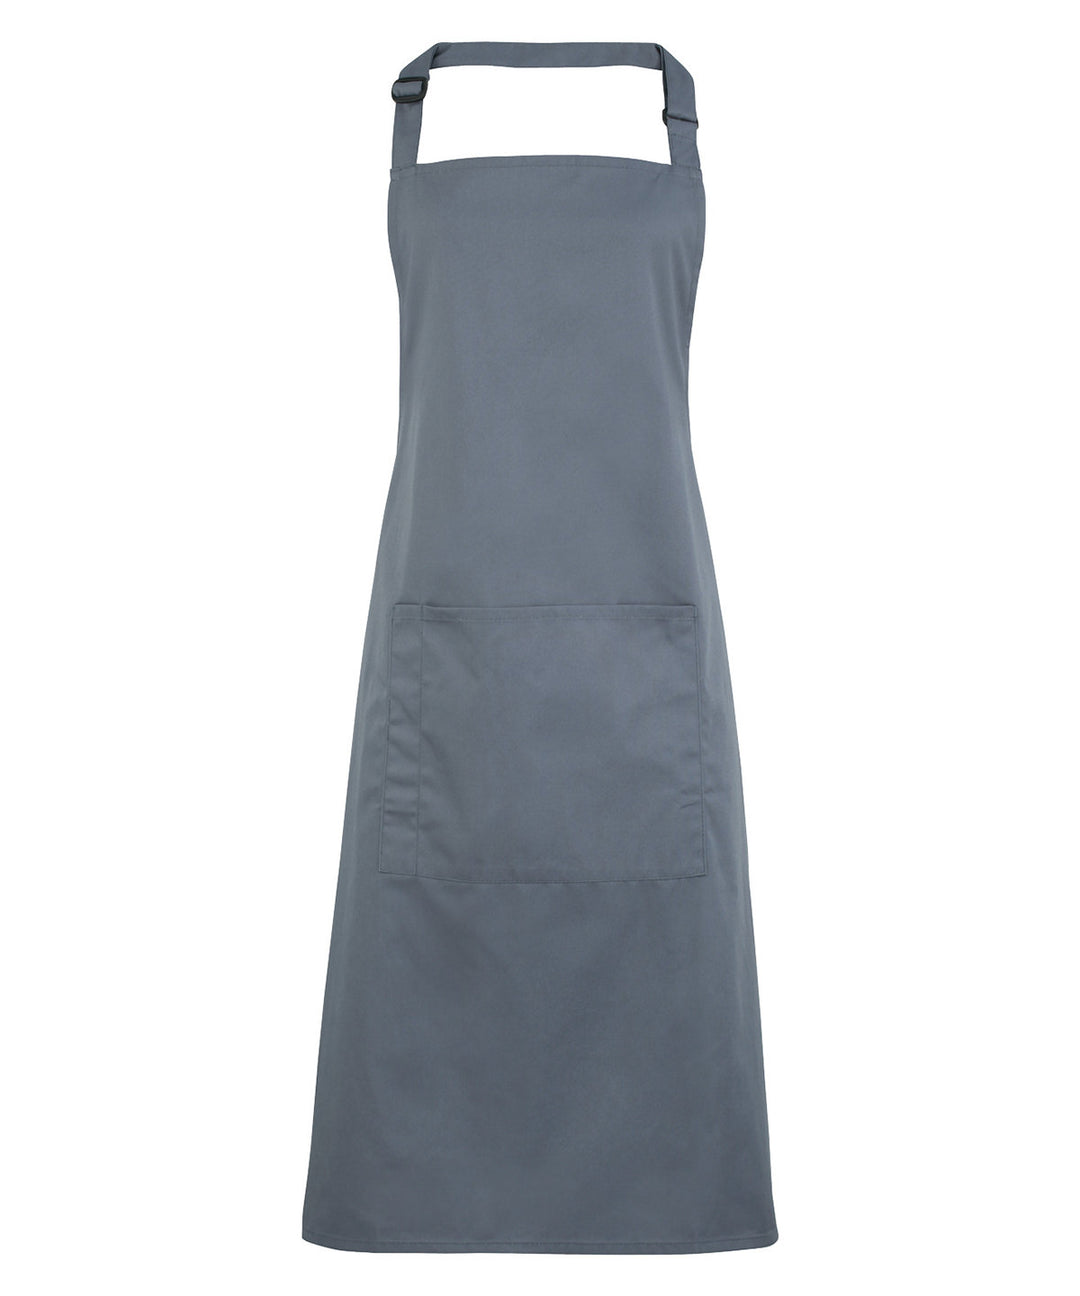 a gray apron on a white background